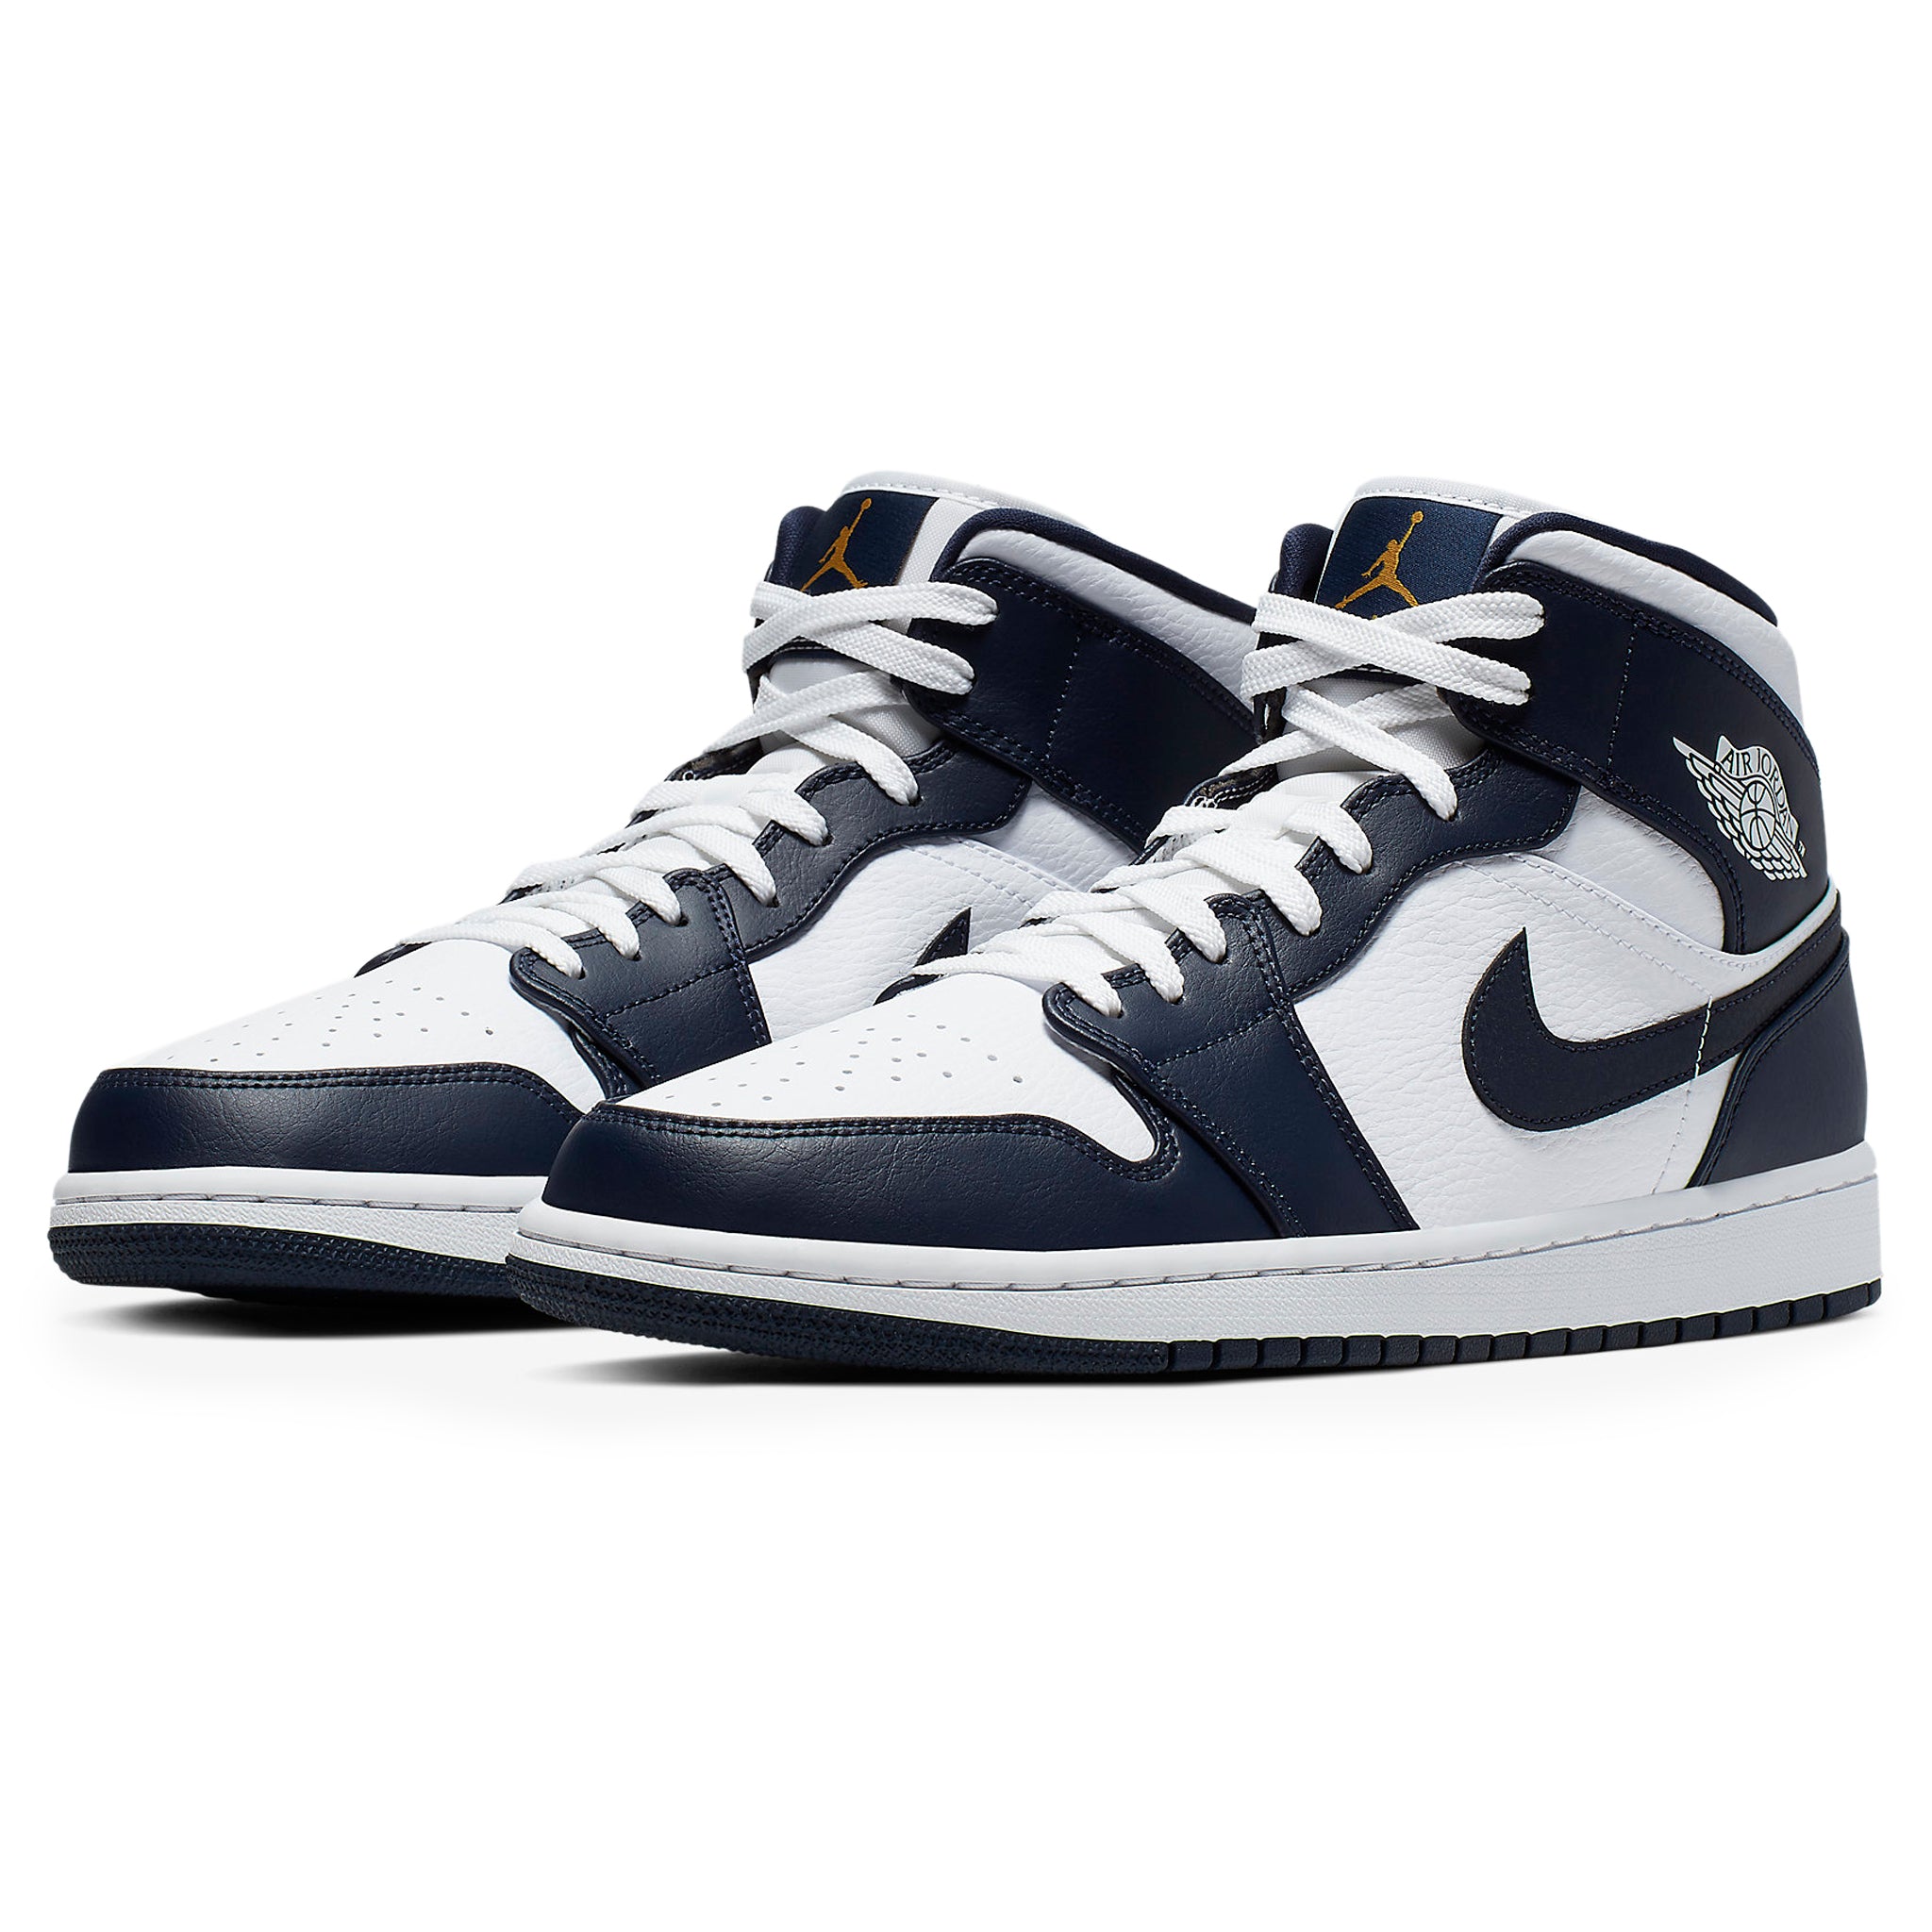 Front side view of Air Jordan 1 Mid White Metallic Gold Obsidian 554724-174